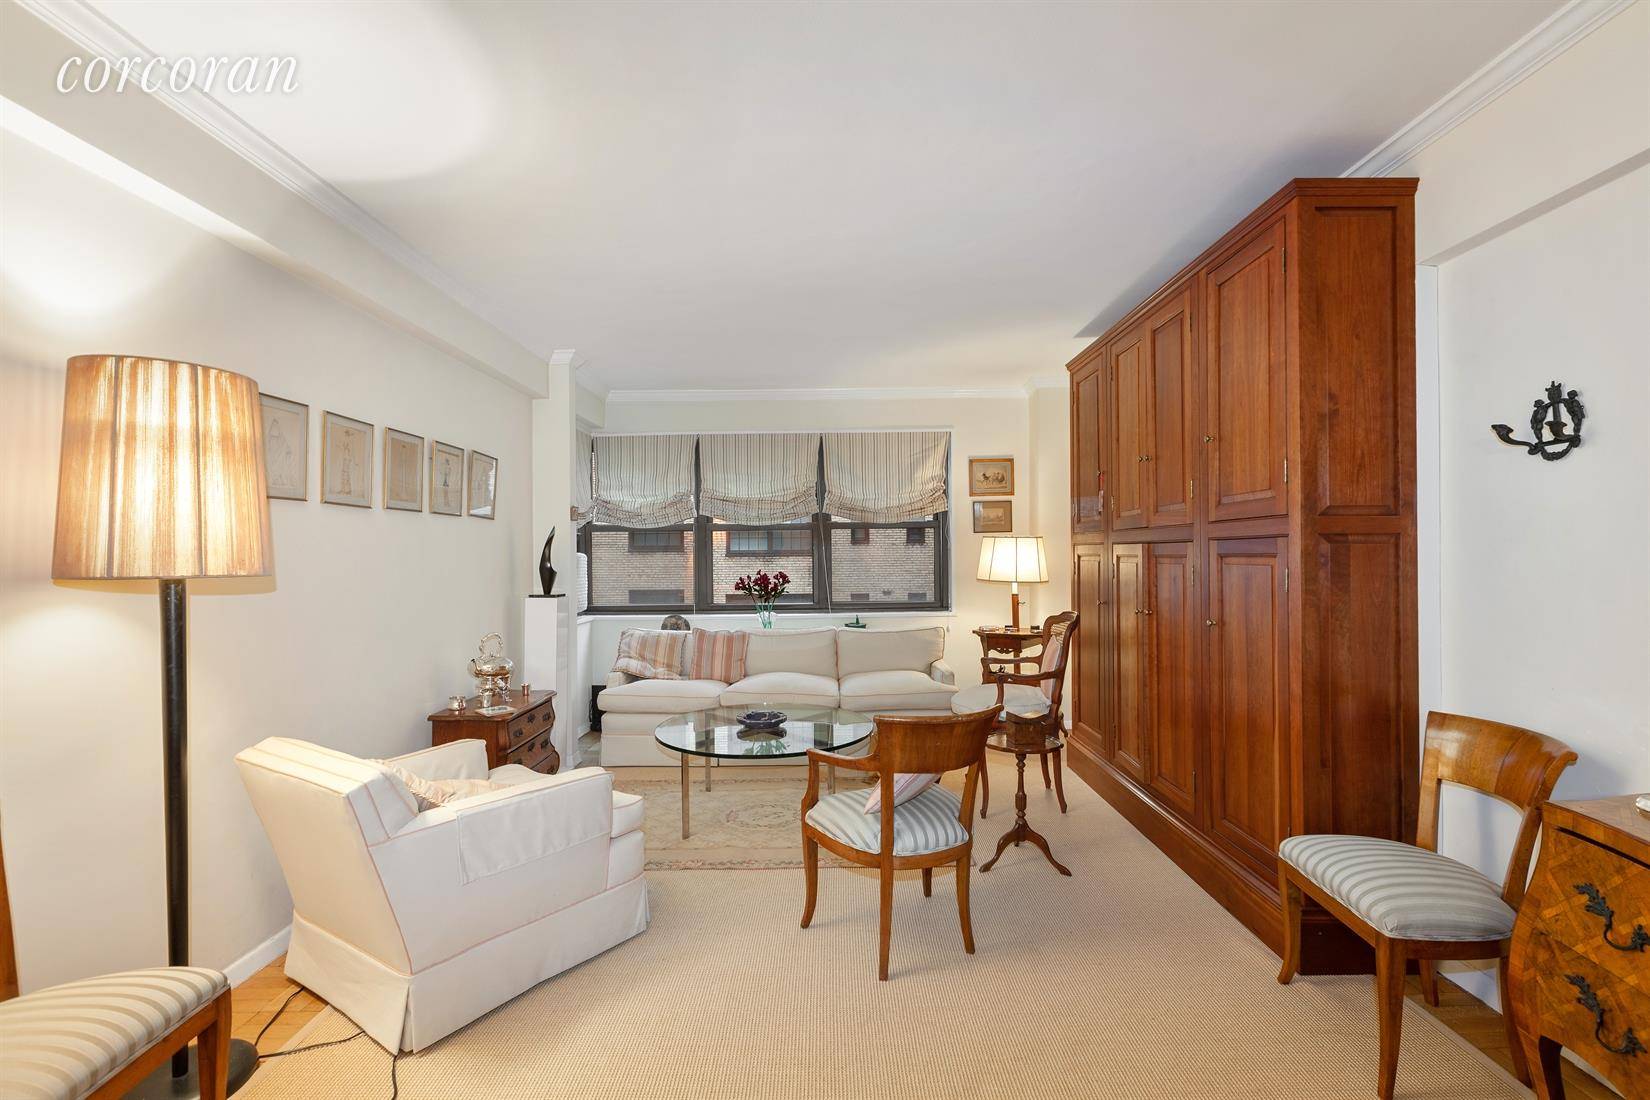 MUSEUM MILE GEM ! This oversized 1 Bedroom, 1 Bath is located on a prime block steps off Fifth Avenue in a long established full service cooperative.